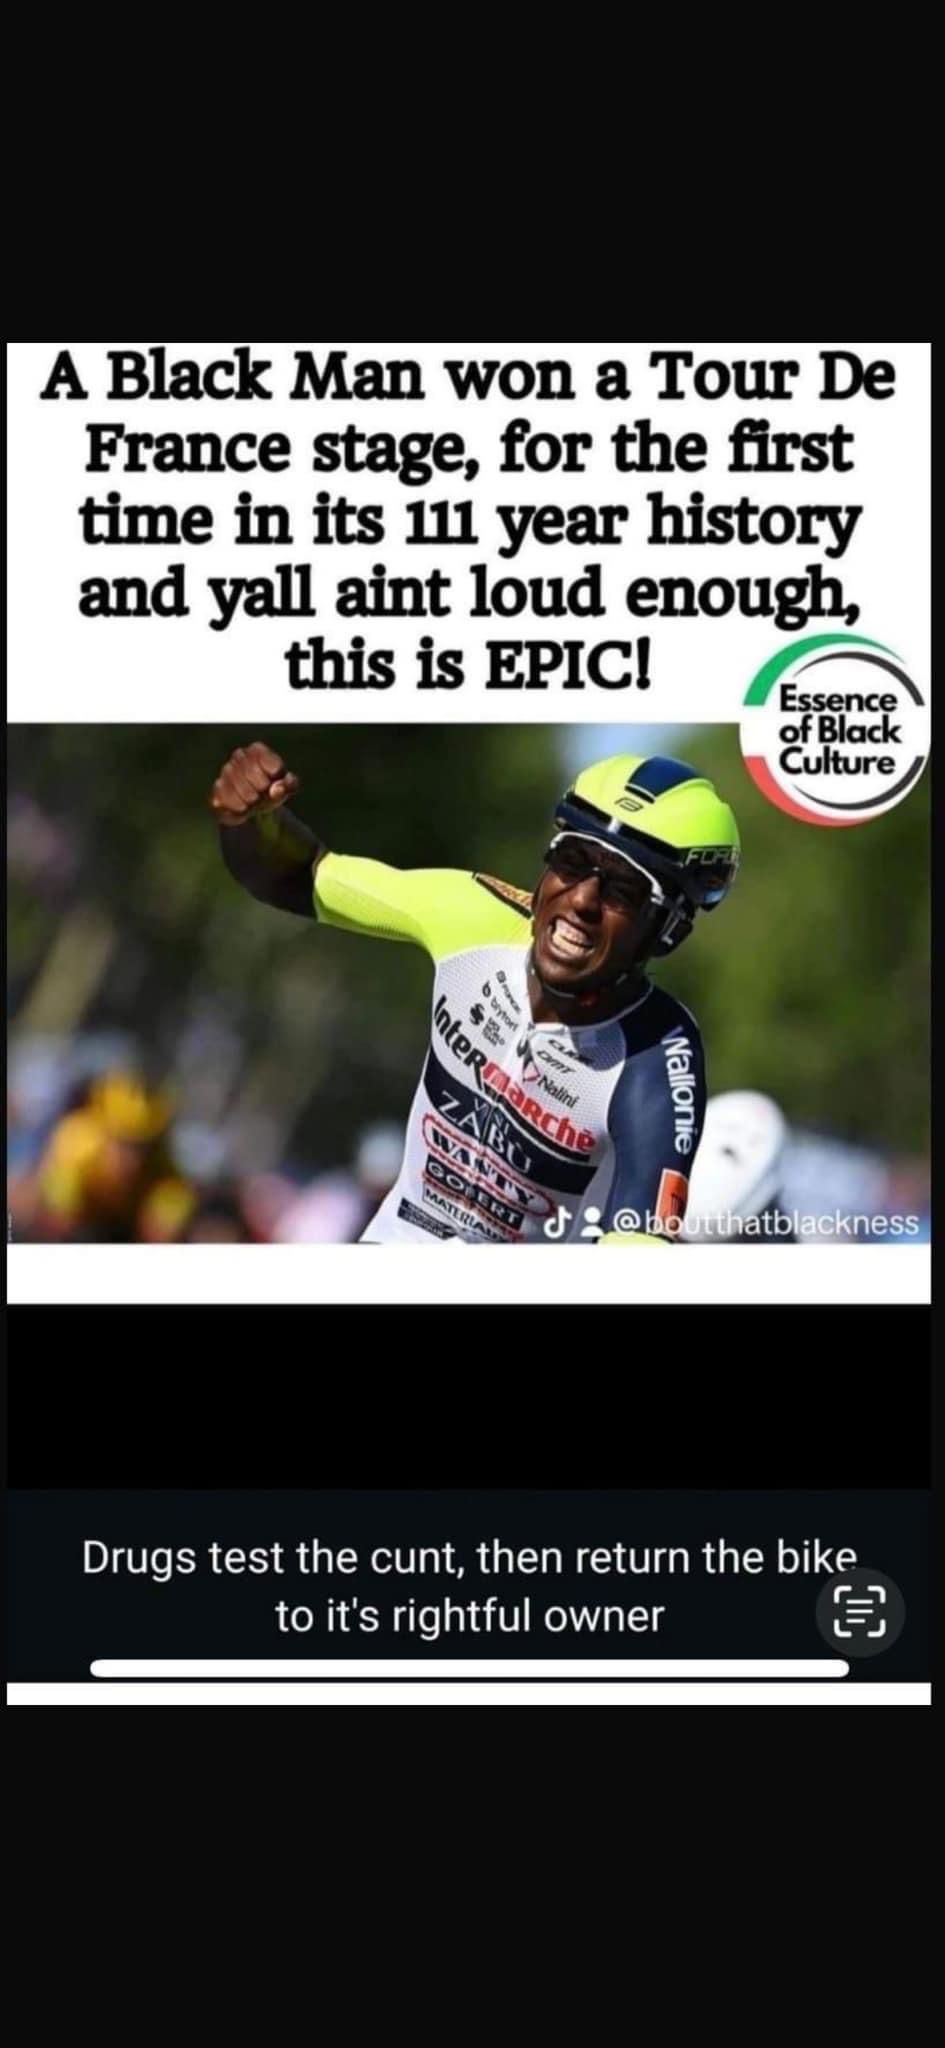 A Black Man won a Tour De
France stage, for the first
time in its 111 year history
and yall aint loud enough,
this is EPIC!
Essence
of Black
Culture
b brytor
Nalini
Intermarche
ZABU
Wallonie
@boutthatblackness
Drugs test the cunt, then return the bike
to it's rightful owner
=